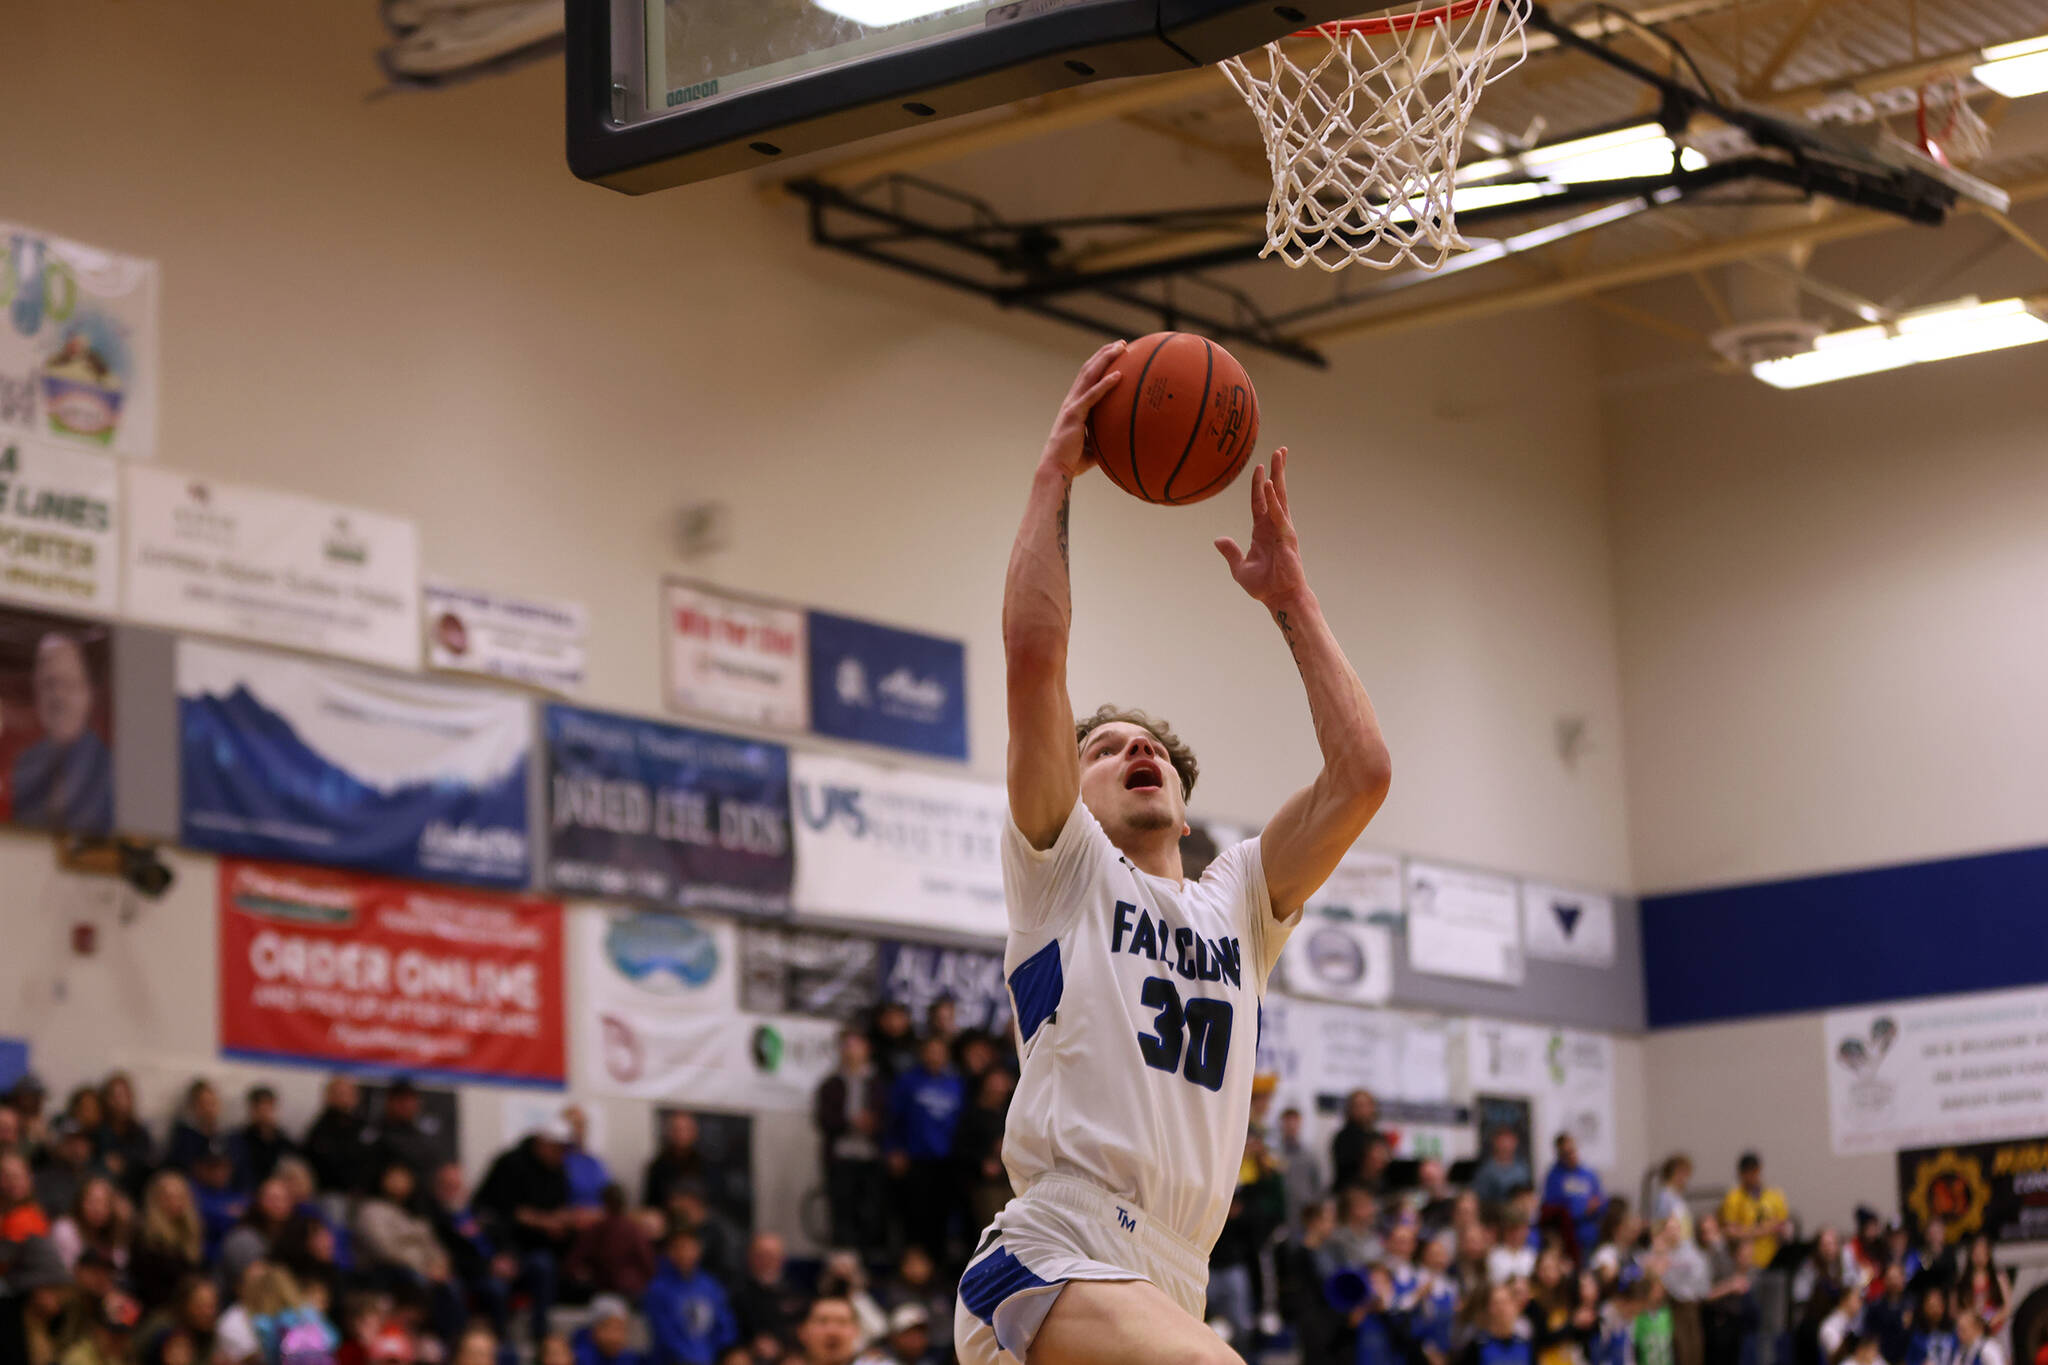 TMHS junior Thomas Baxter rises for a layup on a fastbreak during a Saturday night game against Ketchikan. Baxter on Feb. 9 became the fastest Falcon to reach 1,000 points and is now the school’s third leading scorer. (Ben Hohenstatt / Juneau Empire)